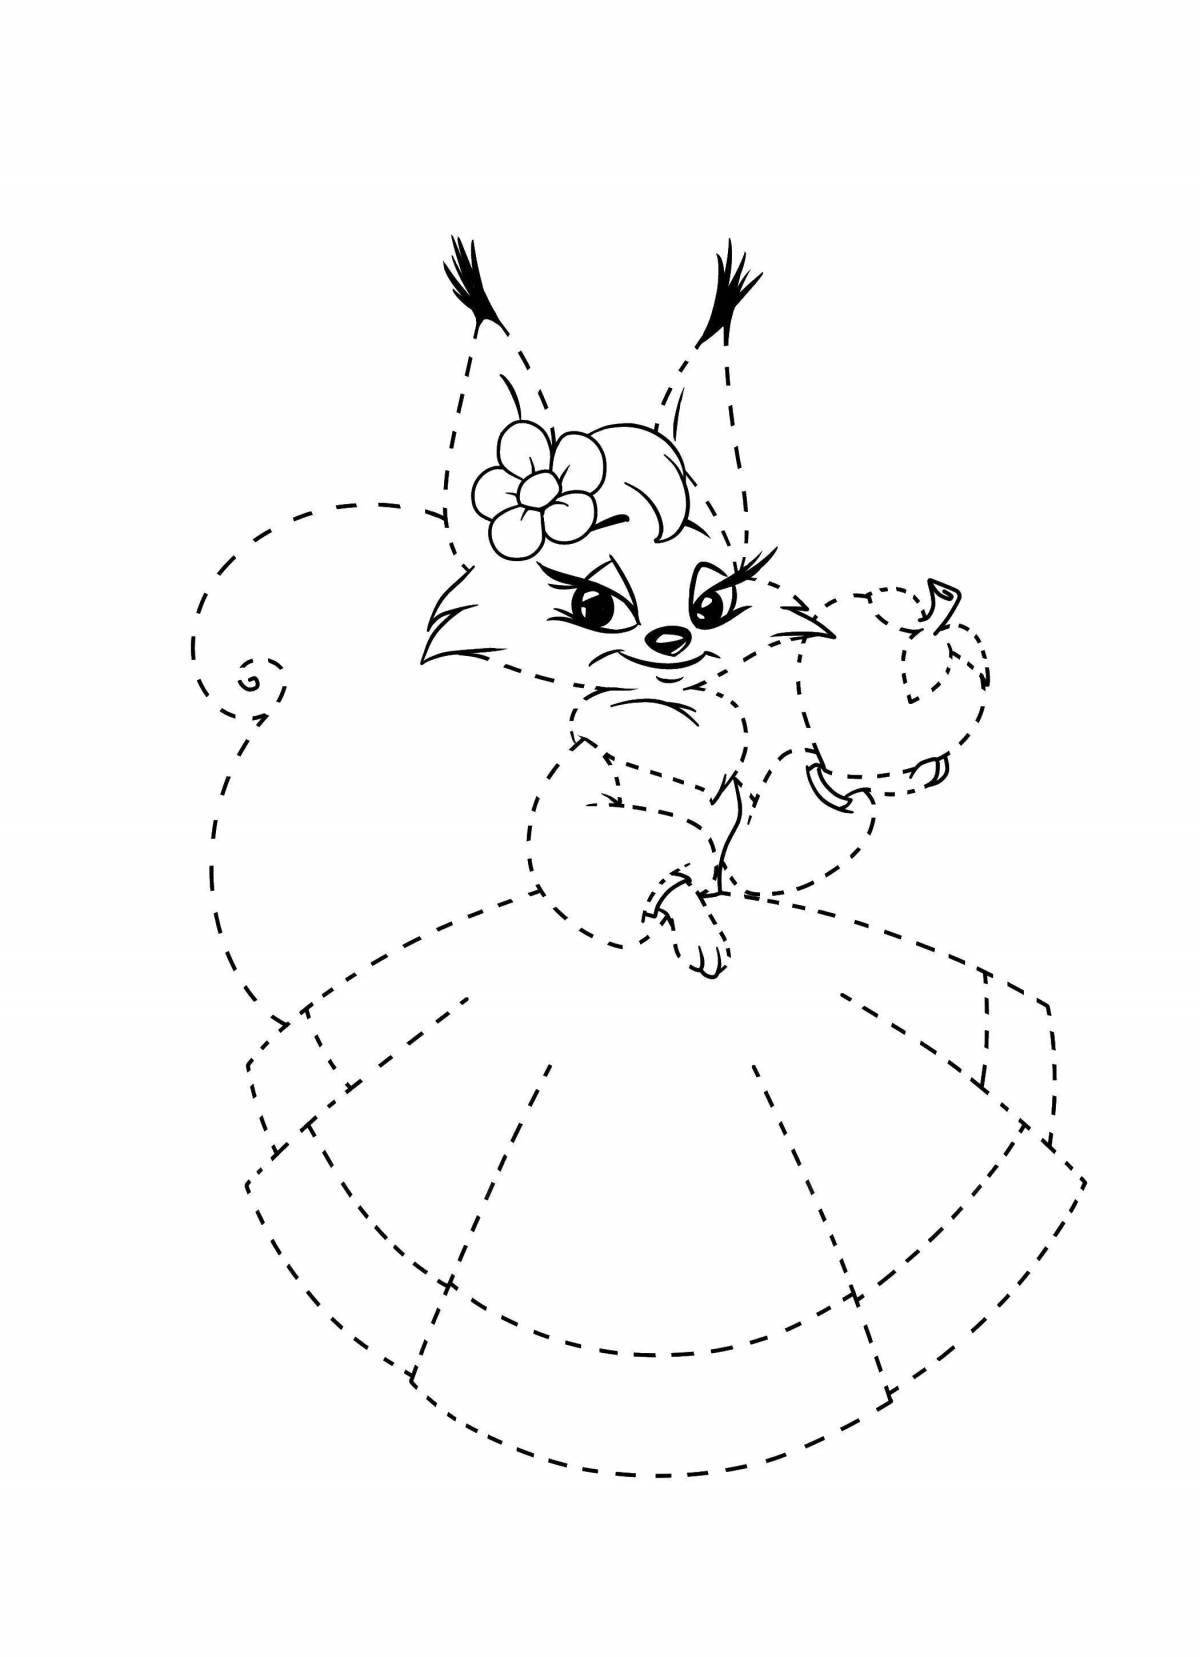 Fun fox coloring page by dots